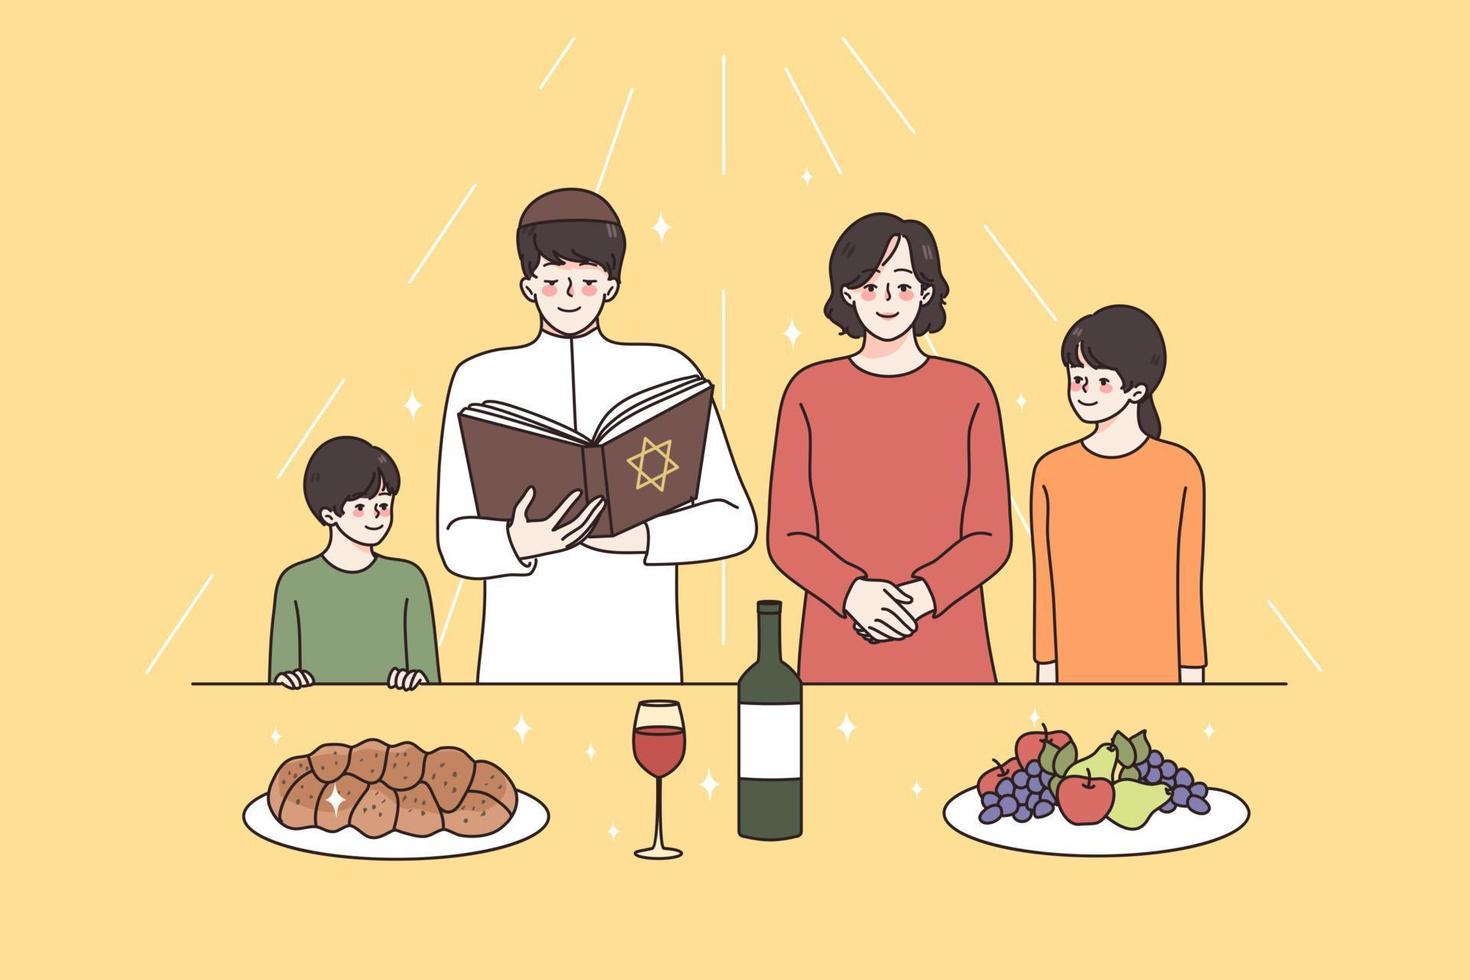 Religious education and spirituality concept. Jew family with children standing with religion book praying all together before meal vector illustration